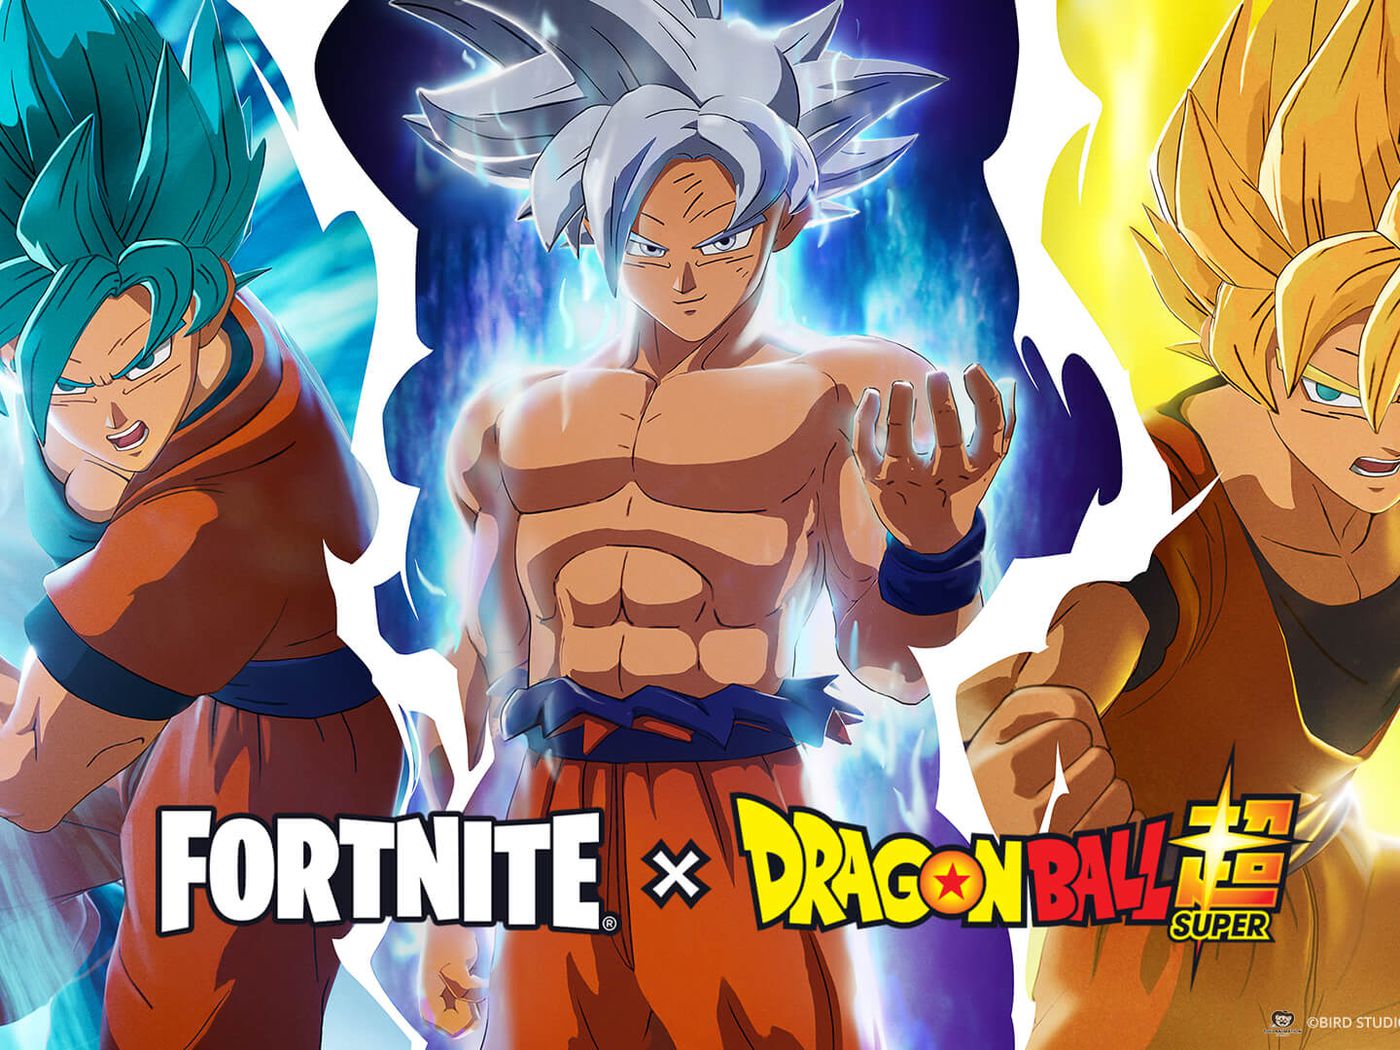 Fortnite x Dragon Ball Super event detailed, including skins, gliders, quests, and more